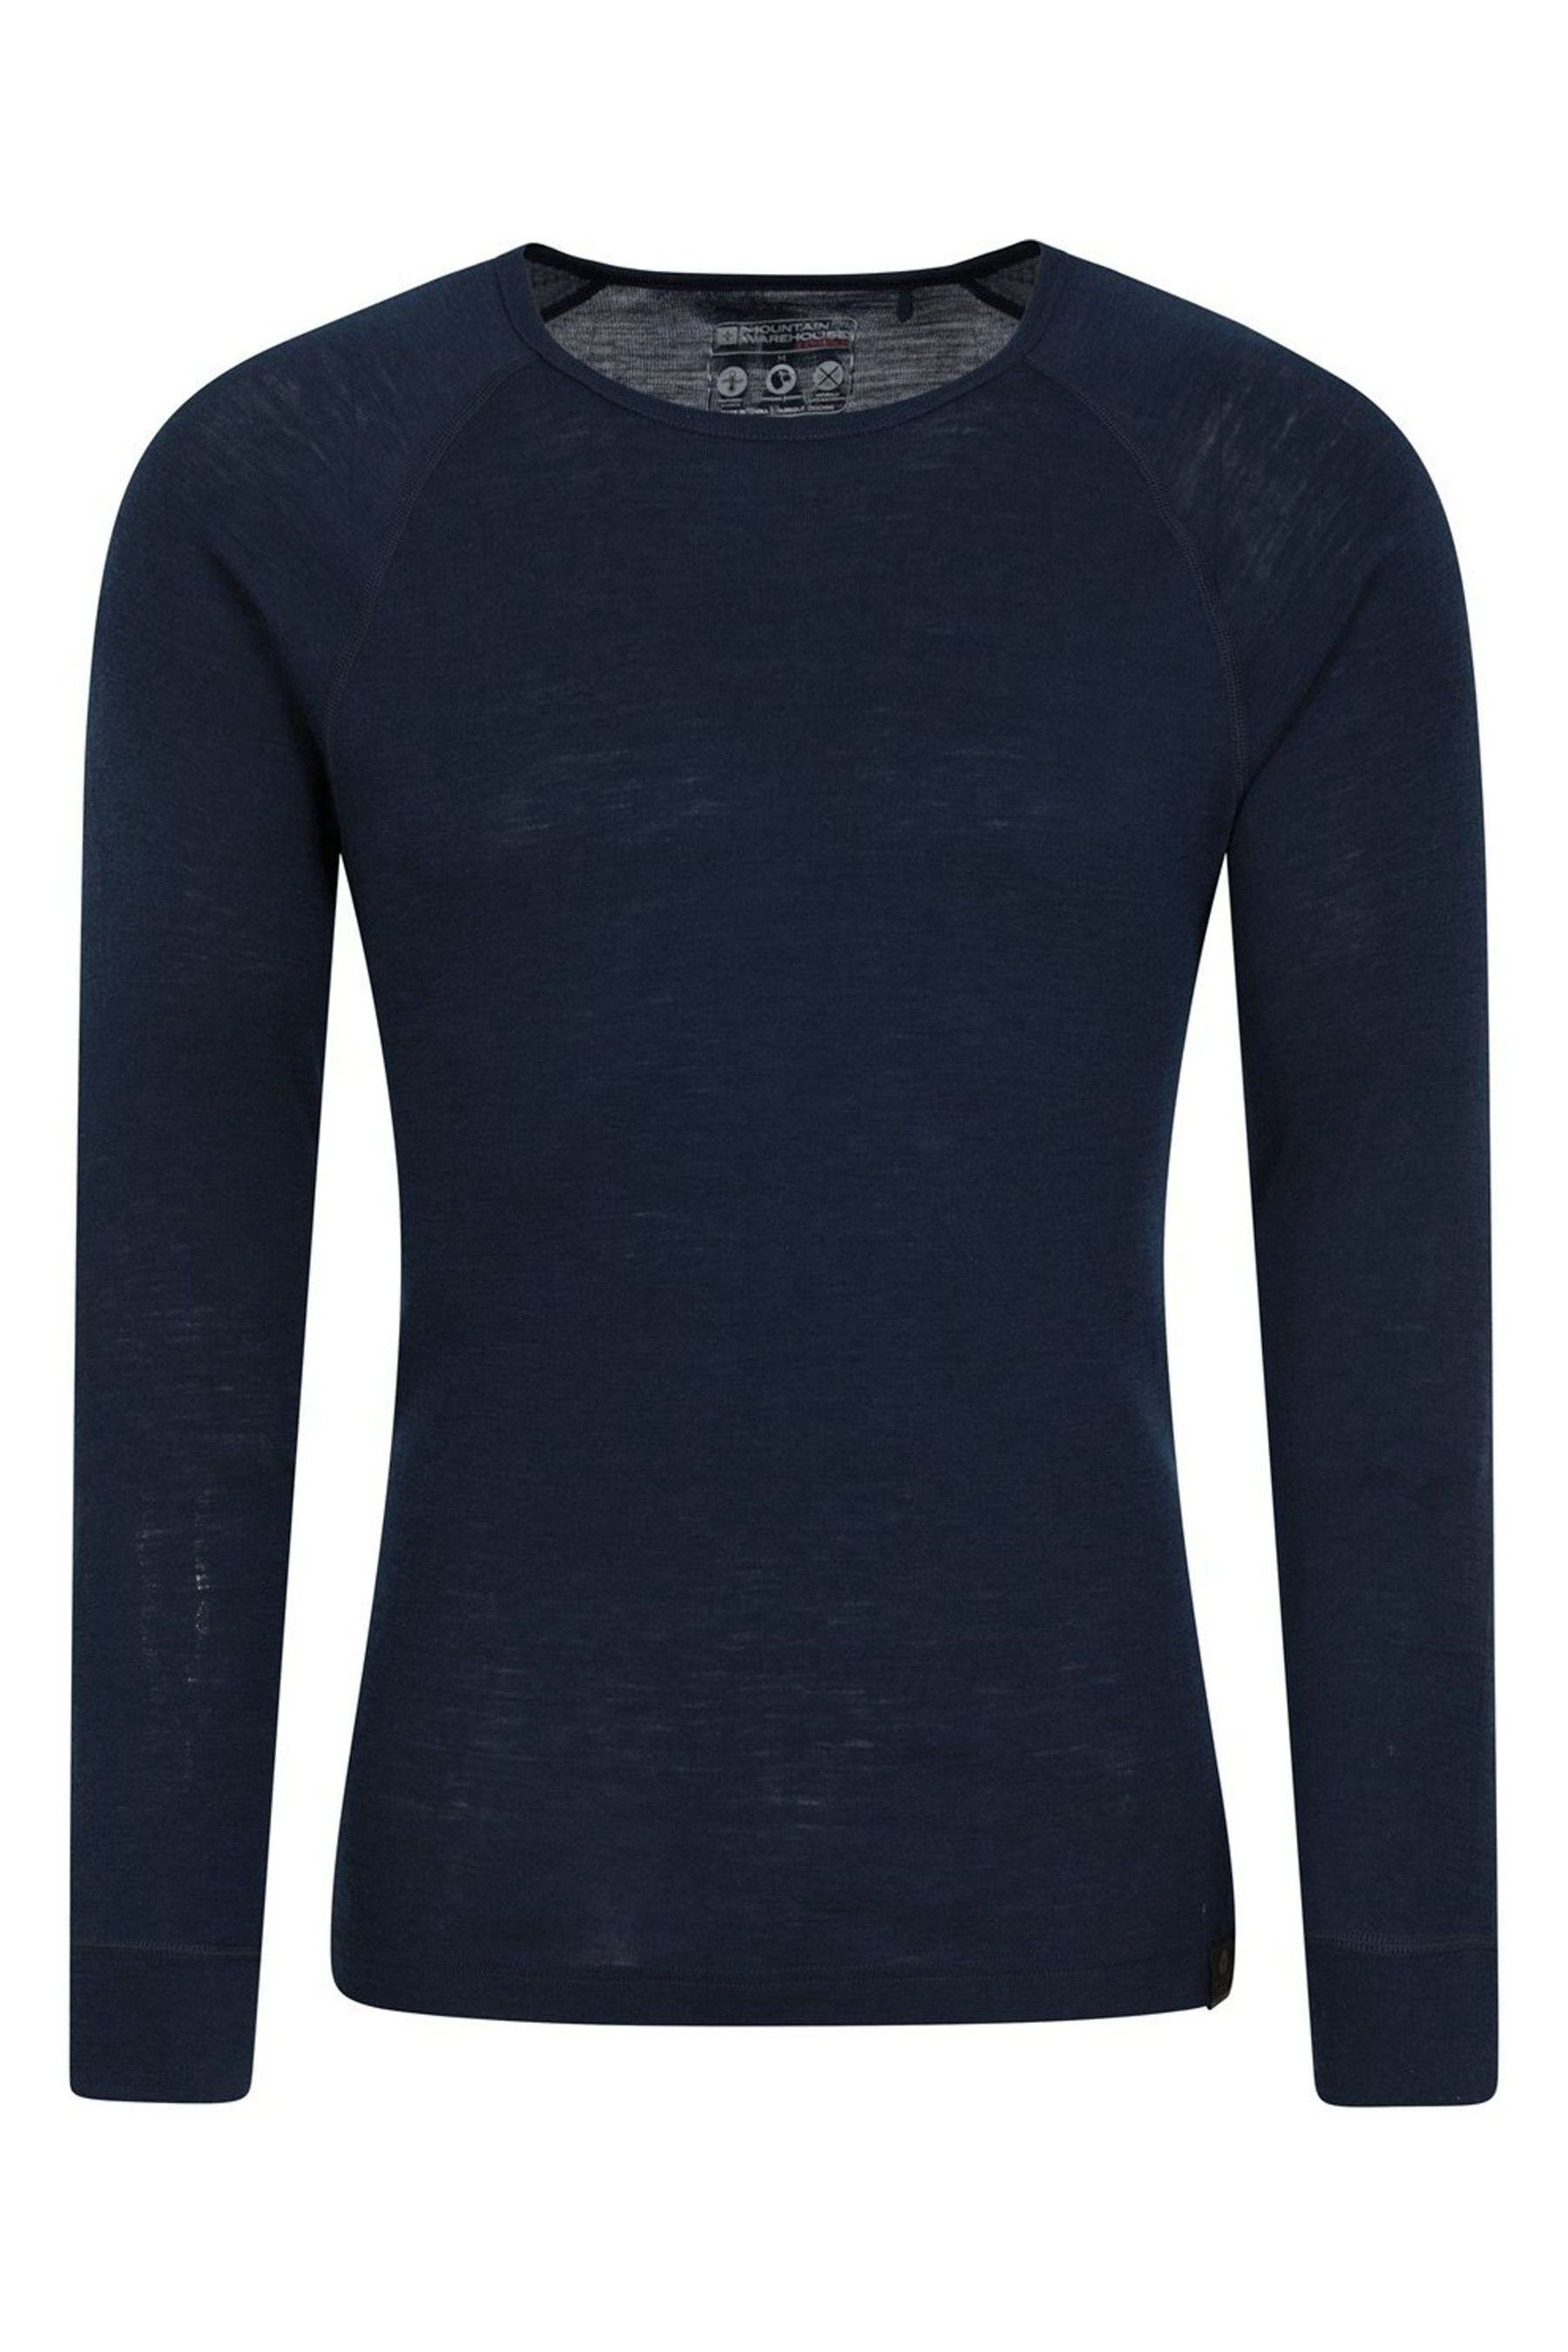 Buy Mountain Warehouse Blue Merino Long Sleeved Thermal Top - Mens from ...